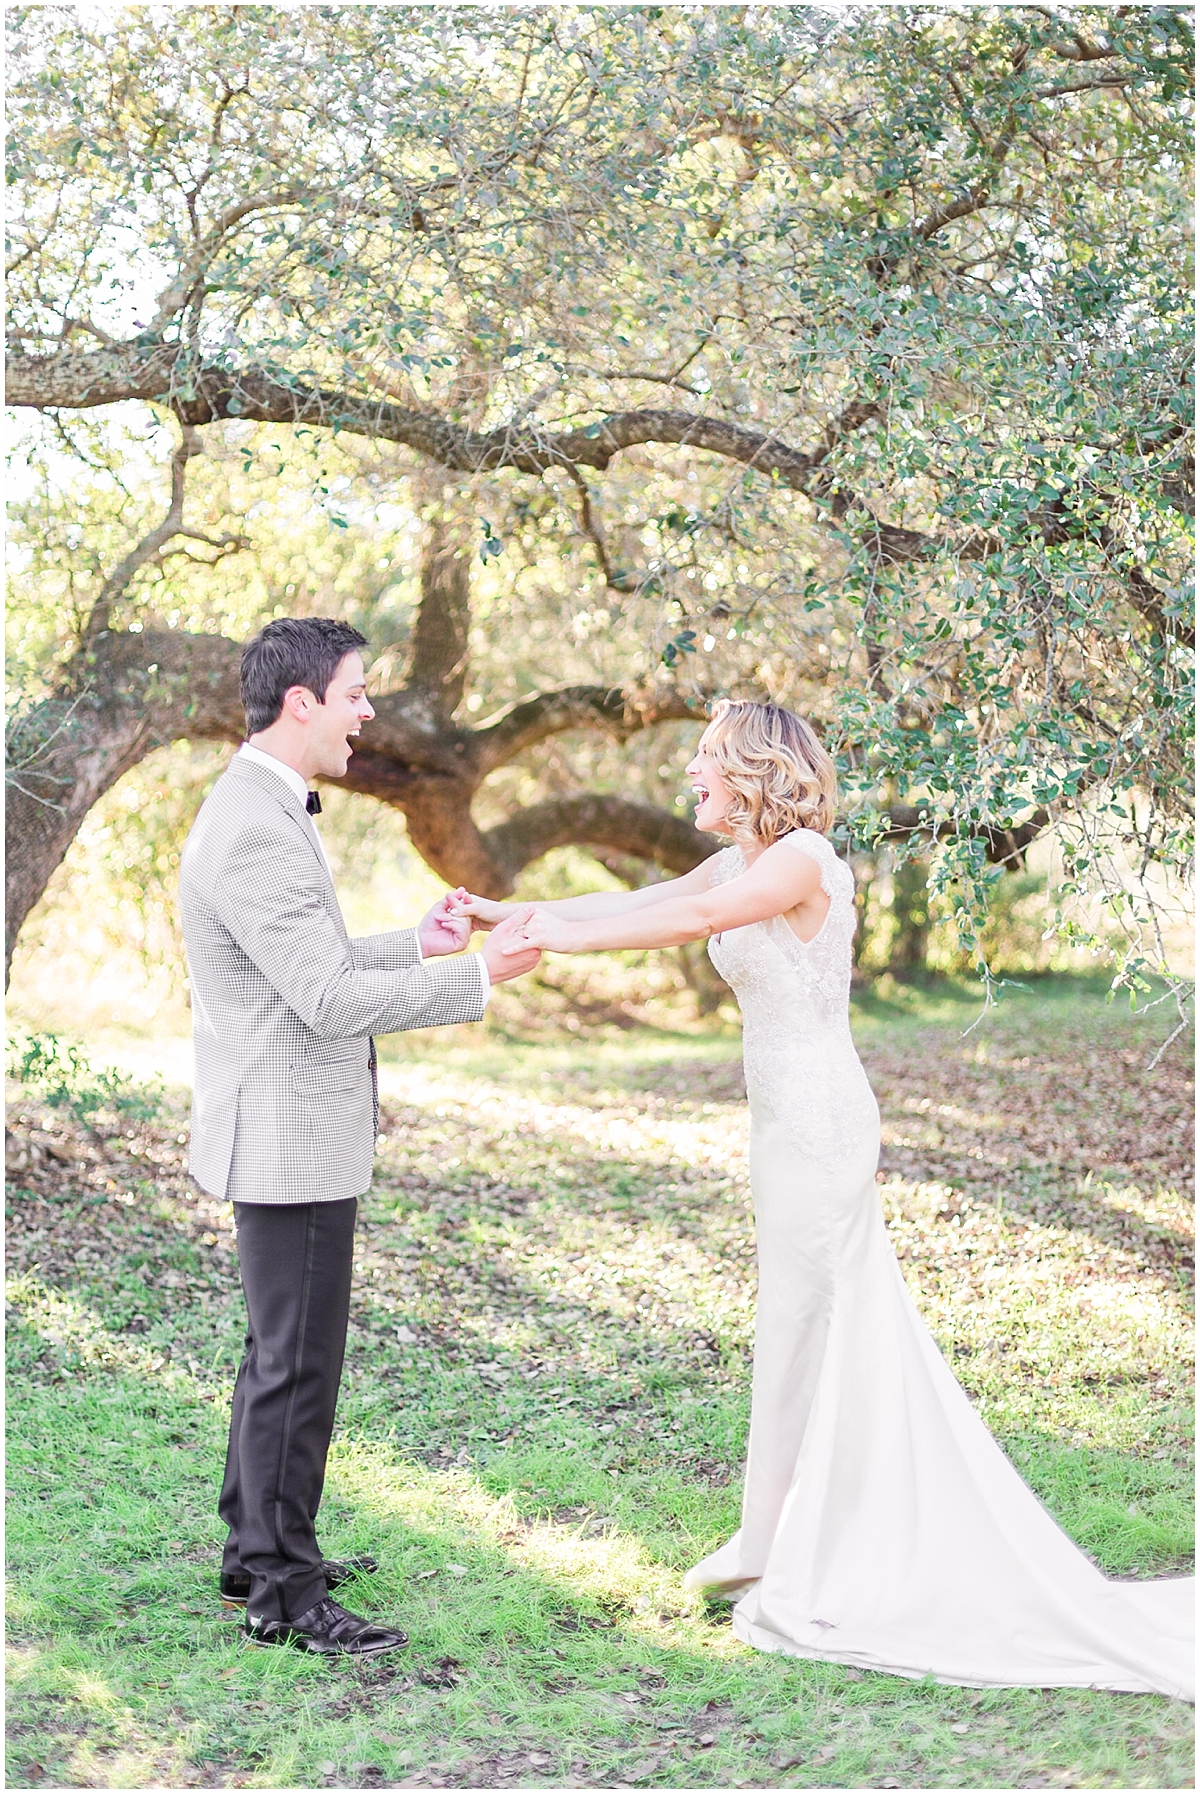 a-classic-modern-black-and-white-wedding-with-gold-accents-inspirational-shoot-at-pecan-springs-ranch-by-allison-jeffers-wedding-photography-dripping-springs-wedding-photographer_0046